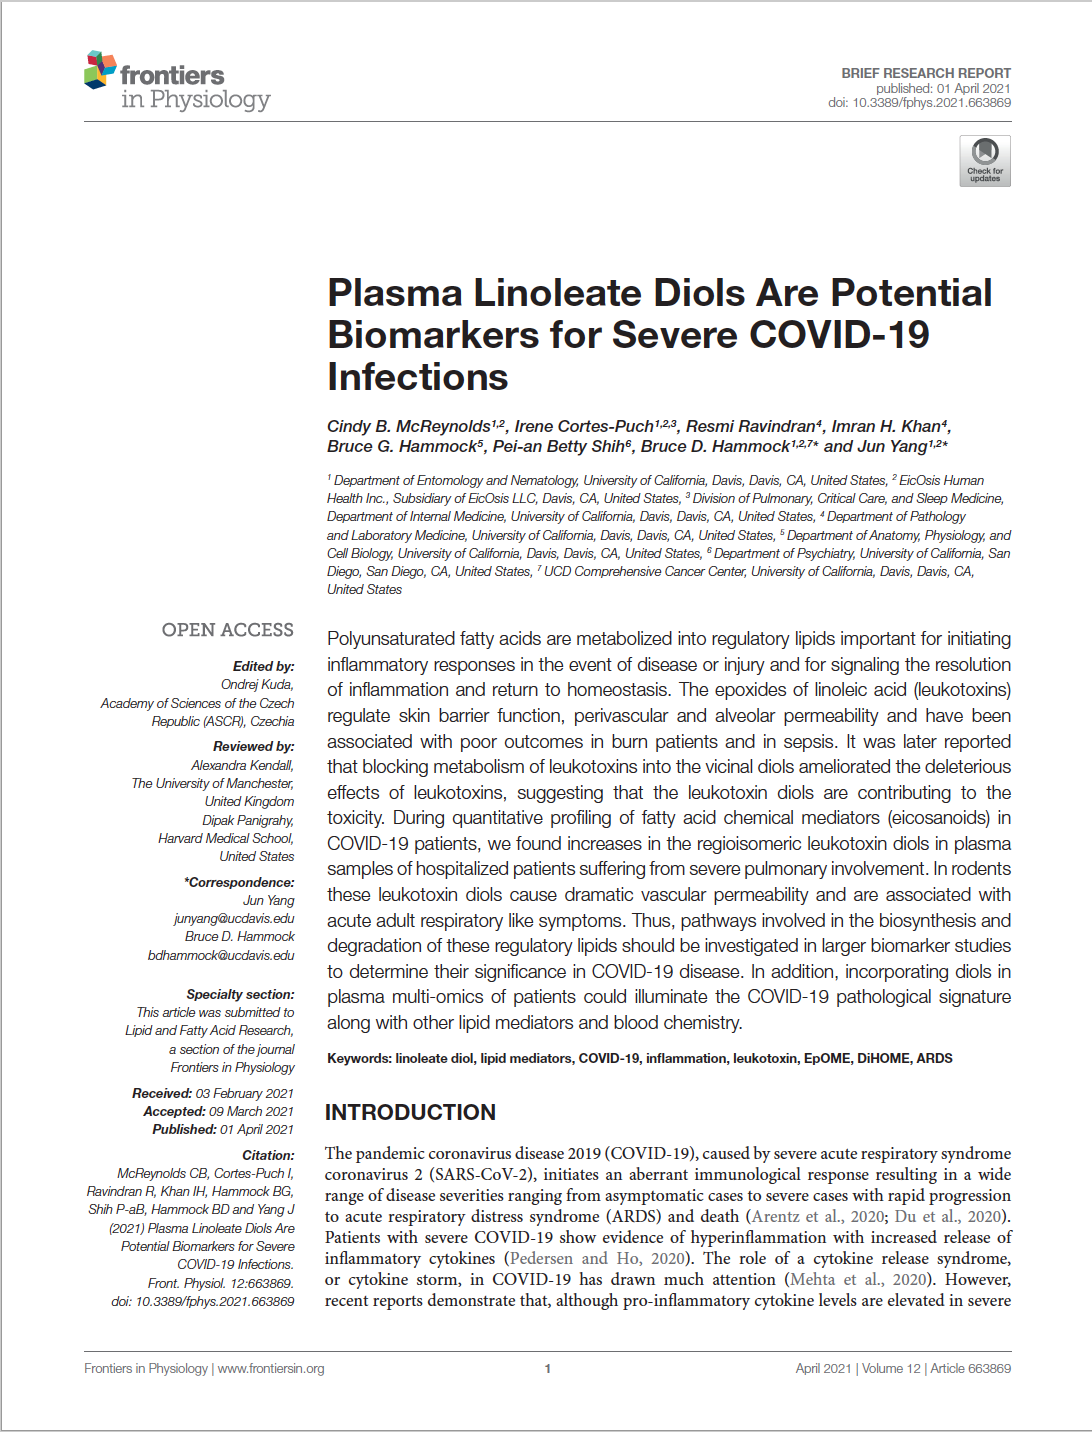 First page of scientific paper on a biomarker of severe COVID-19